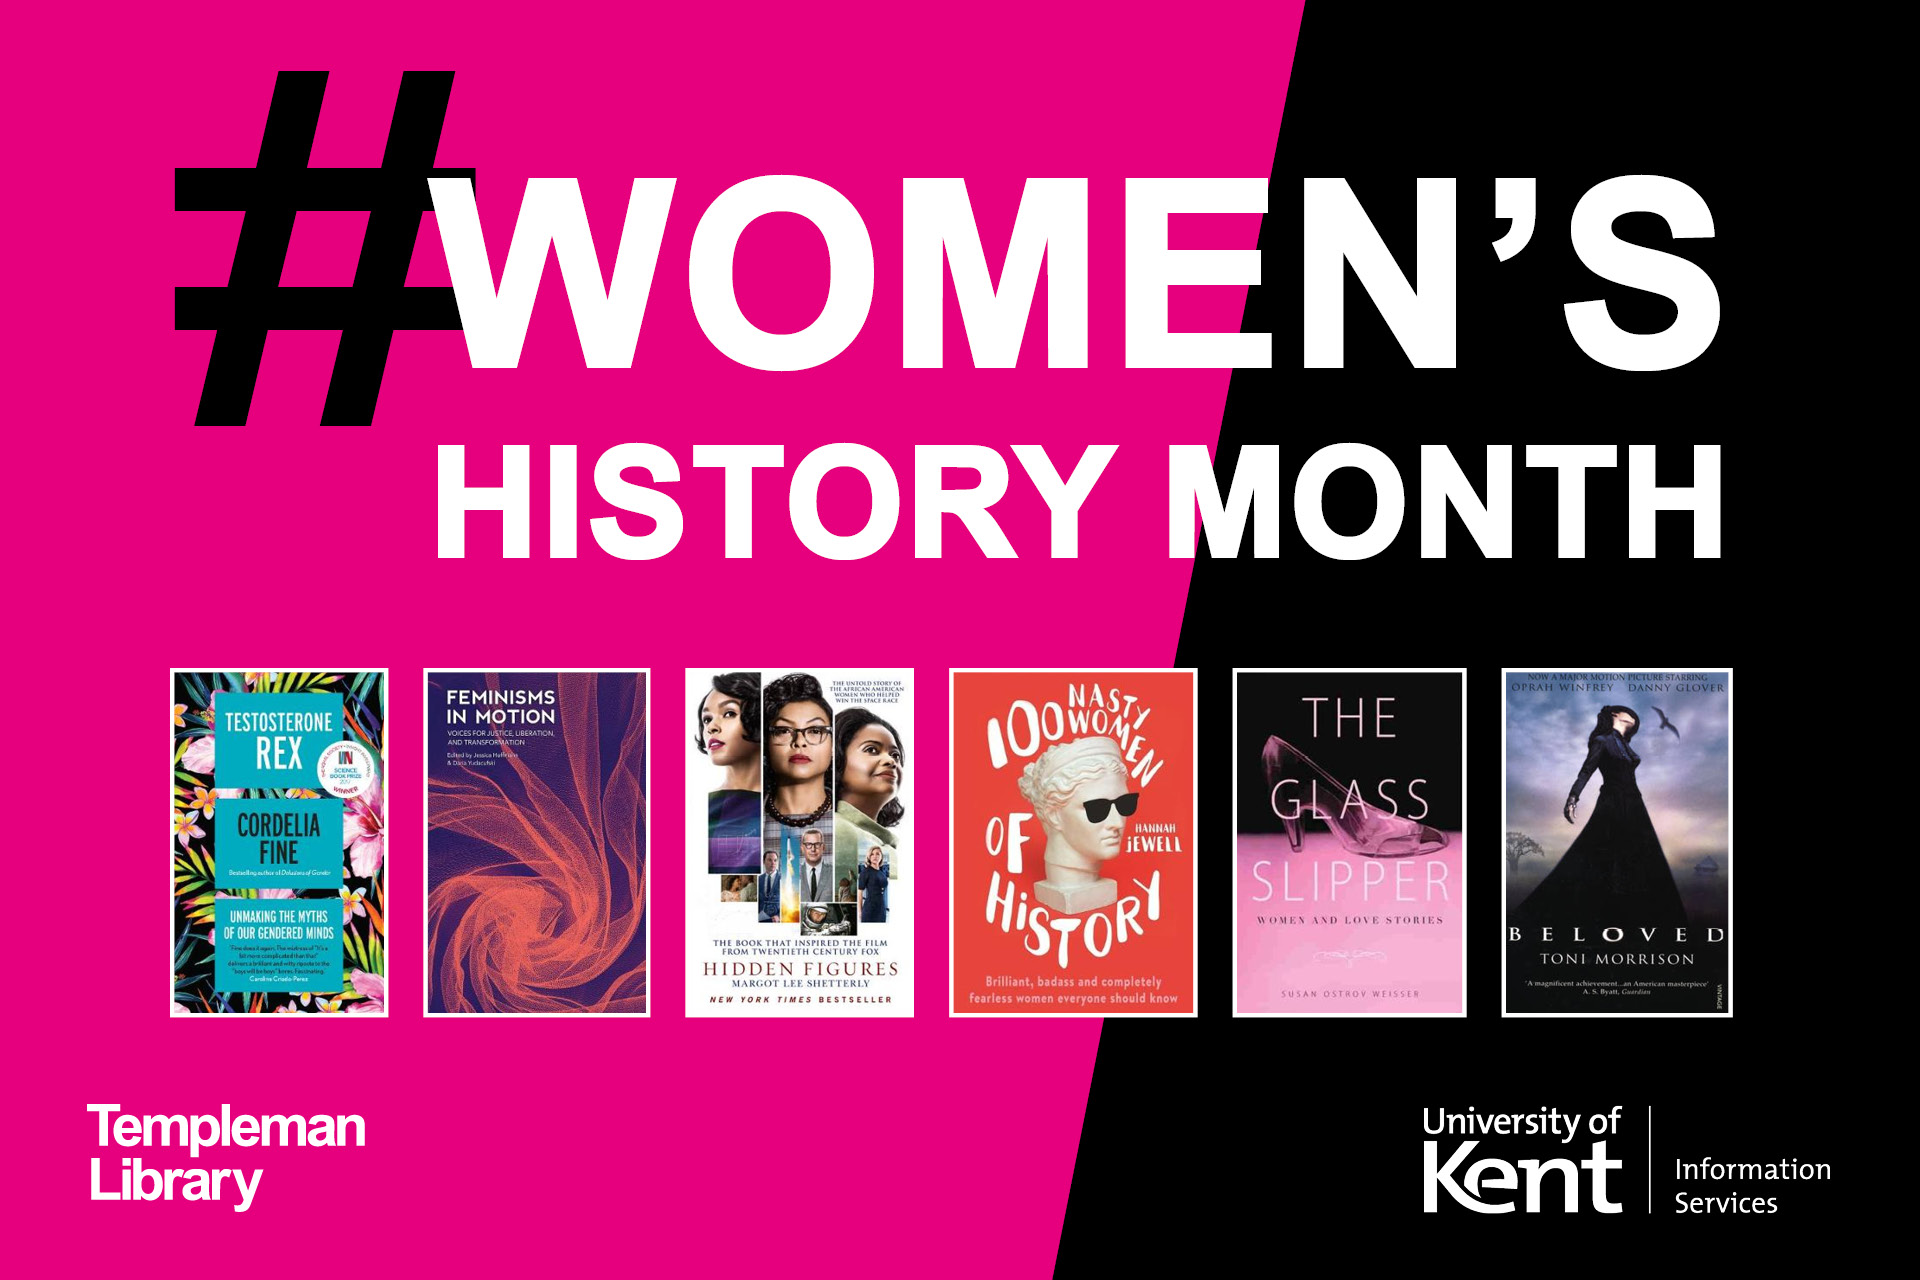 women-s-history-month-2021-templeman-library-resources-library-and-it-news